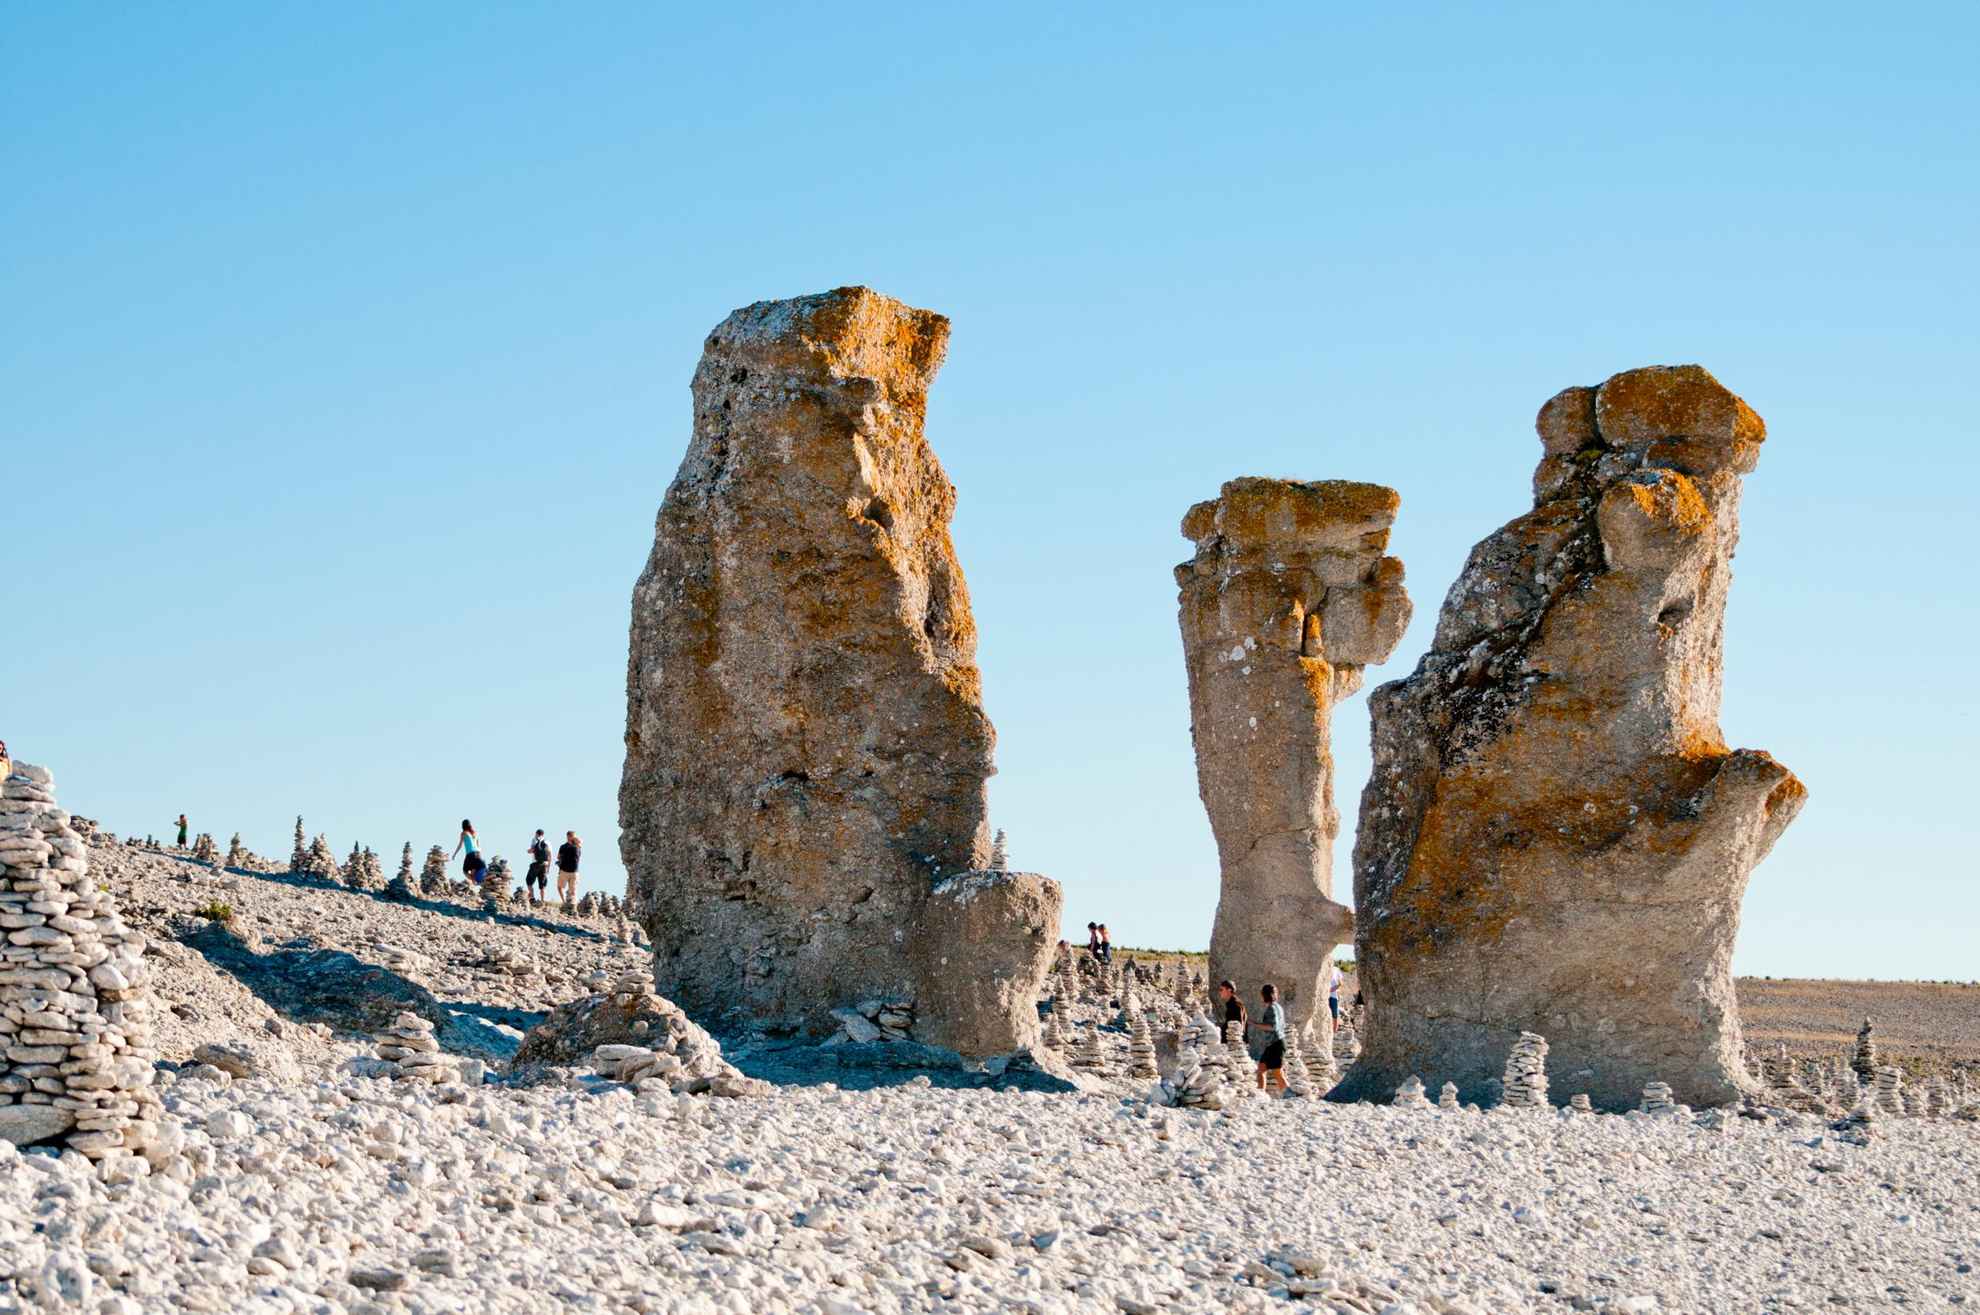 Limestone monoliths on a rocky beach on Gotland, with a few people walking in the background.